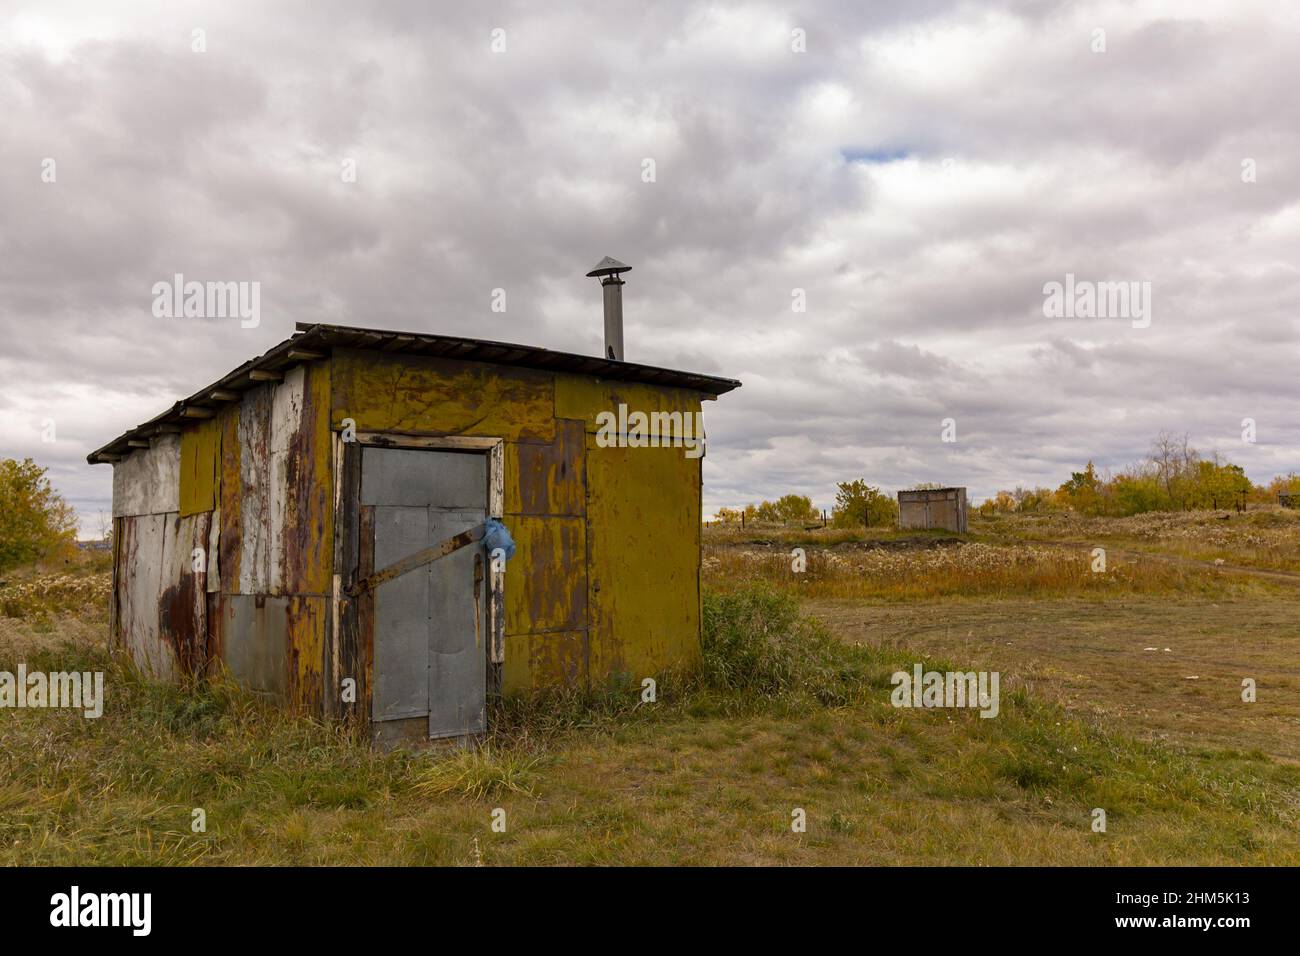 Temporary houses of migrants built from waste on the outskirts of a large city. Stock Photo